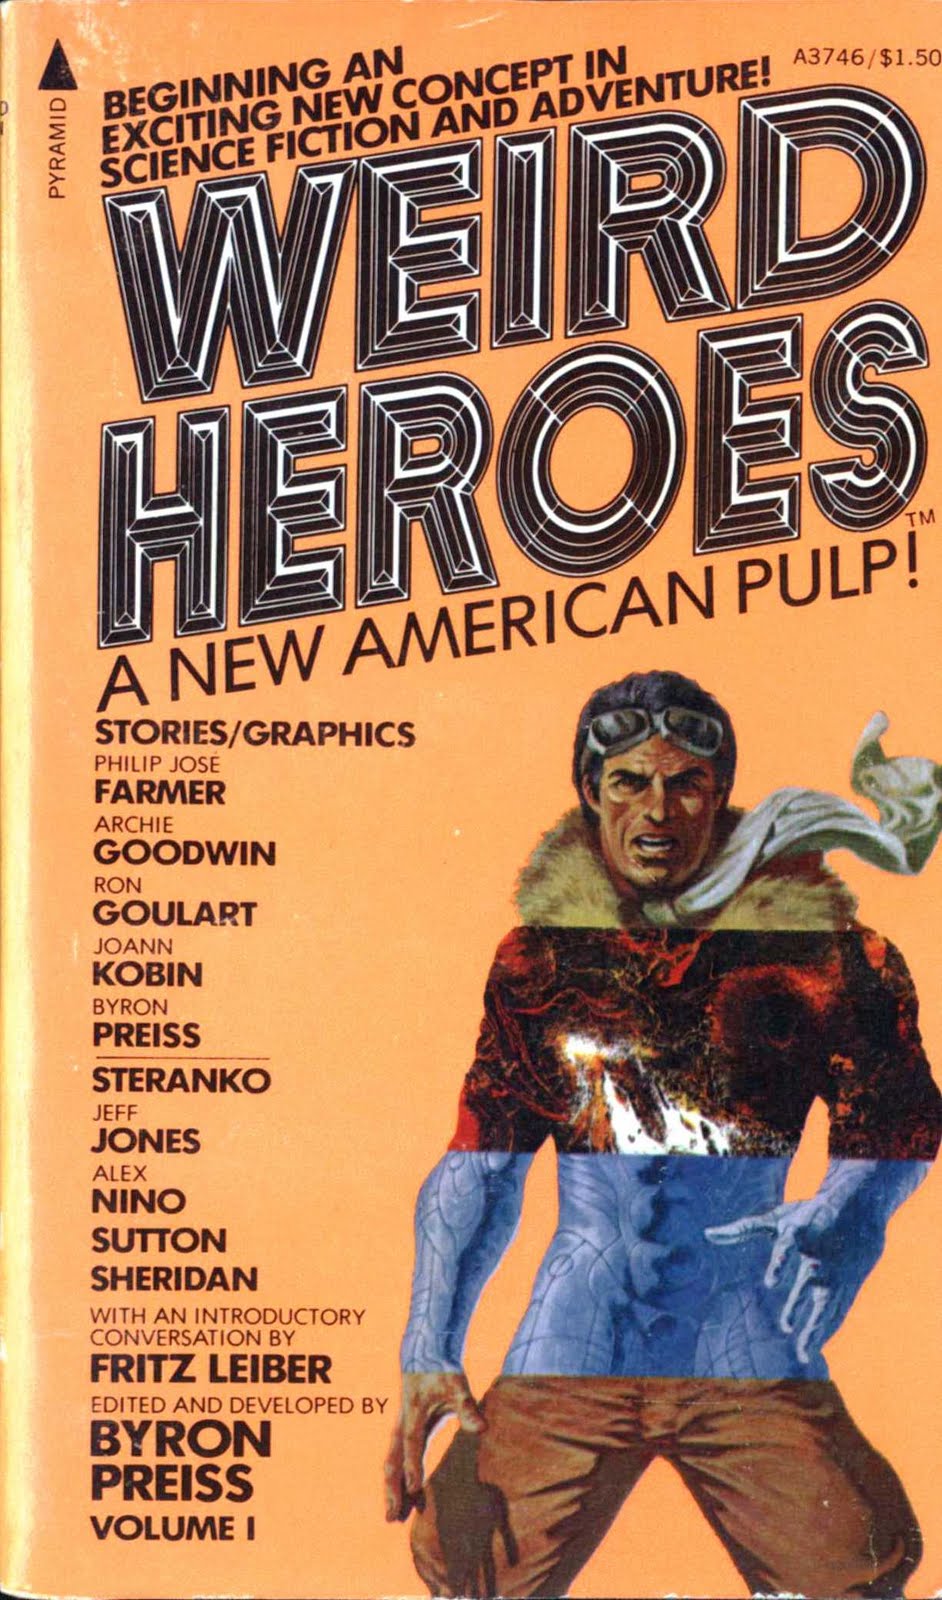 WEIRD HEROES VOLUME 1 Editied & Developed by Byron Preiss!